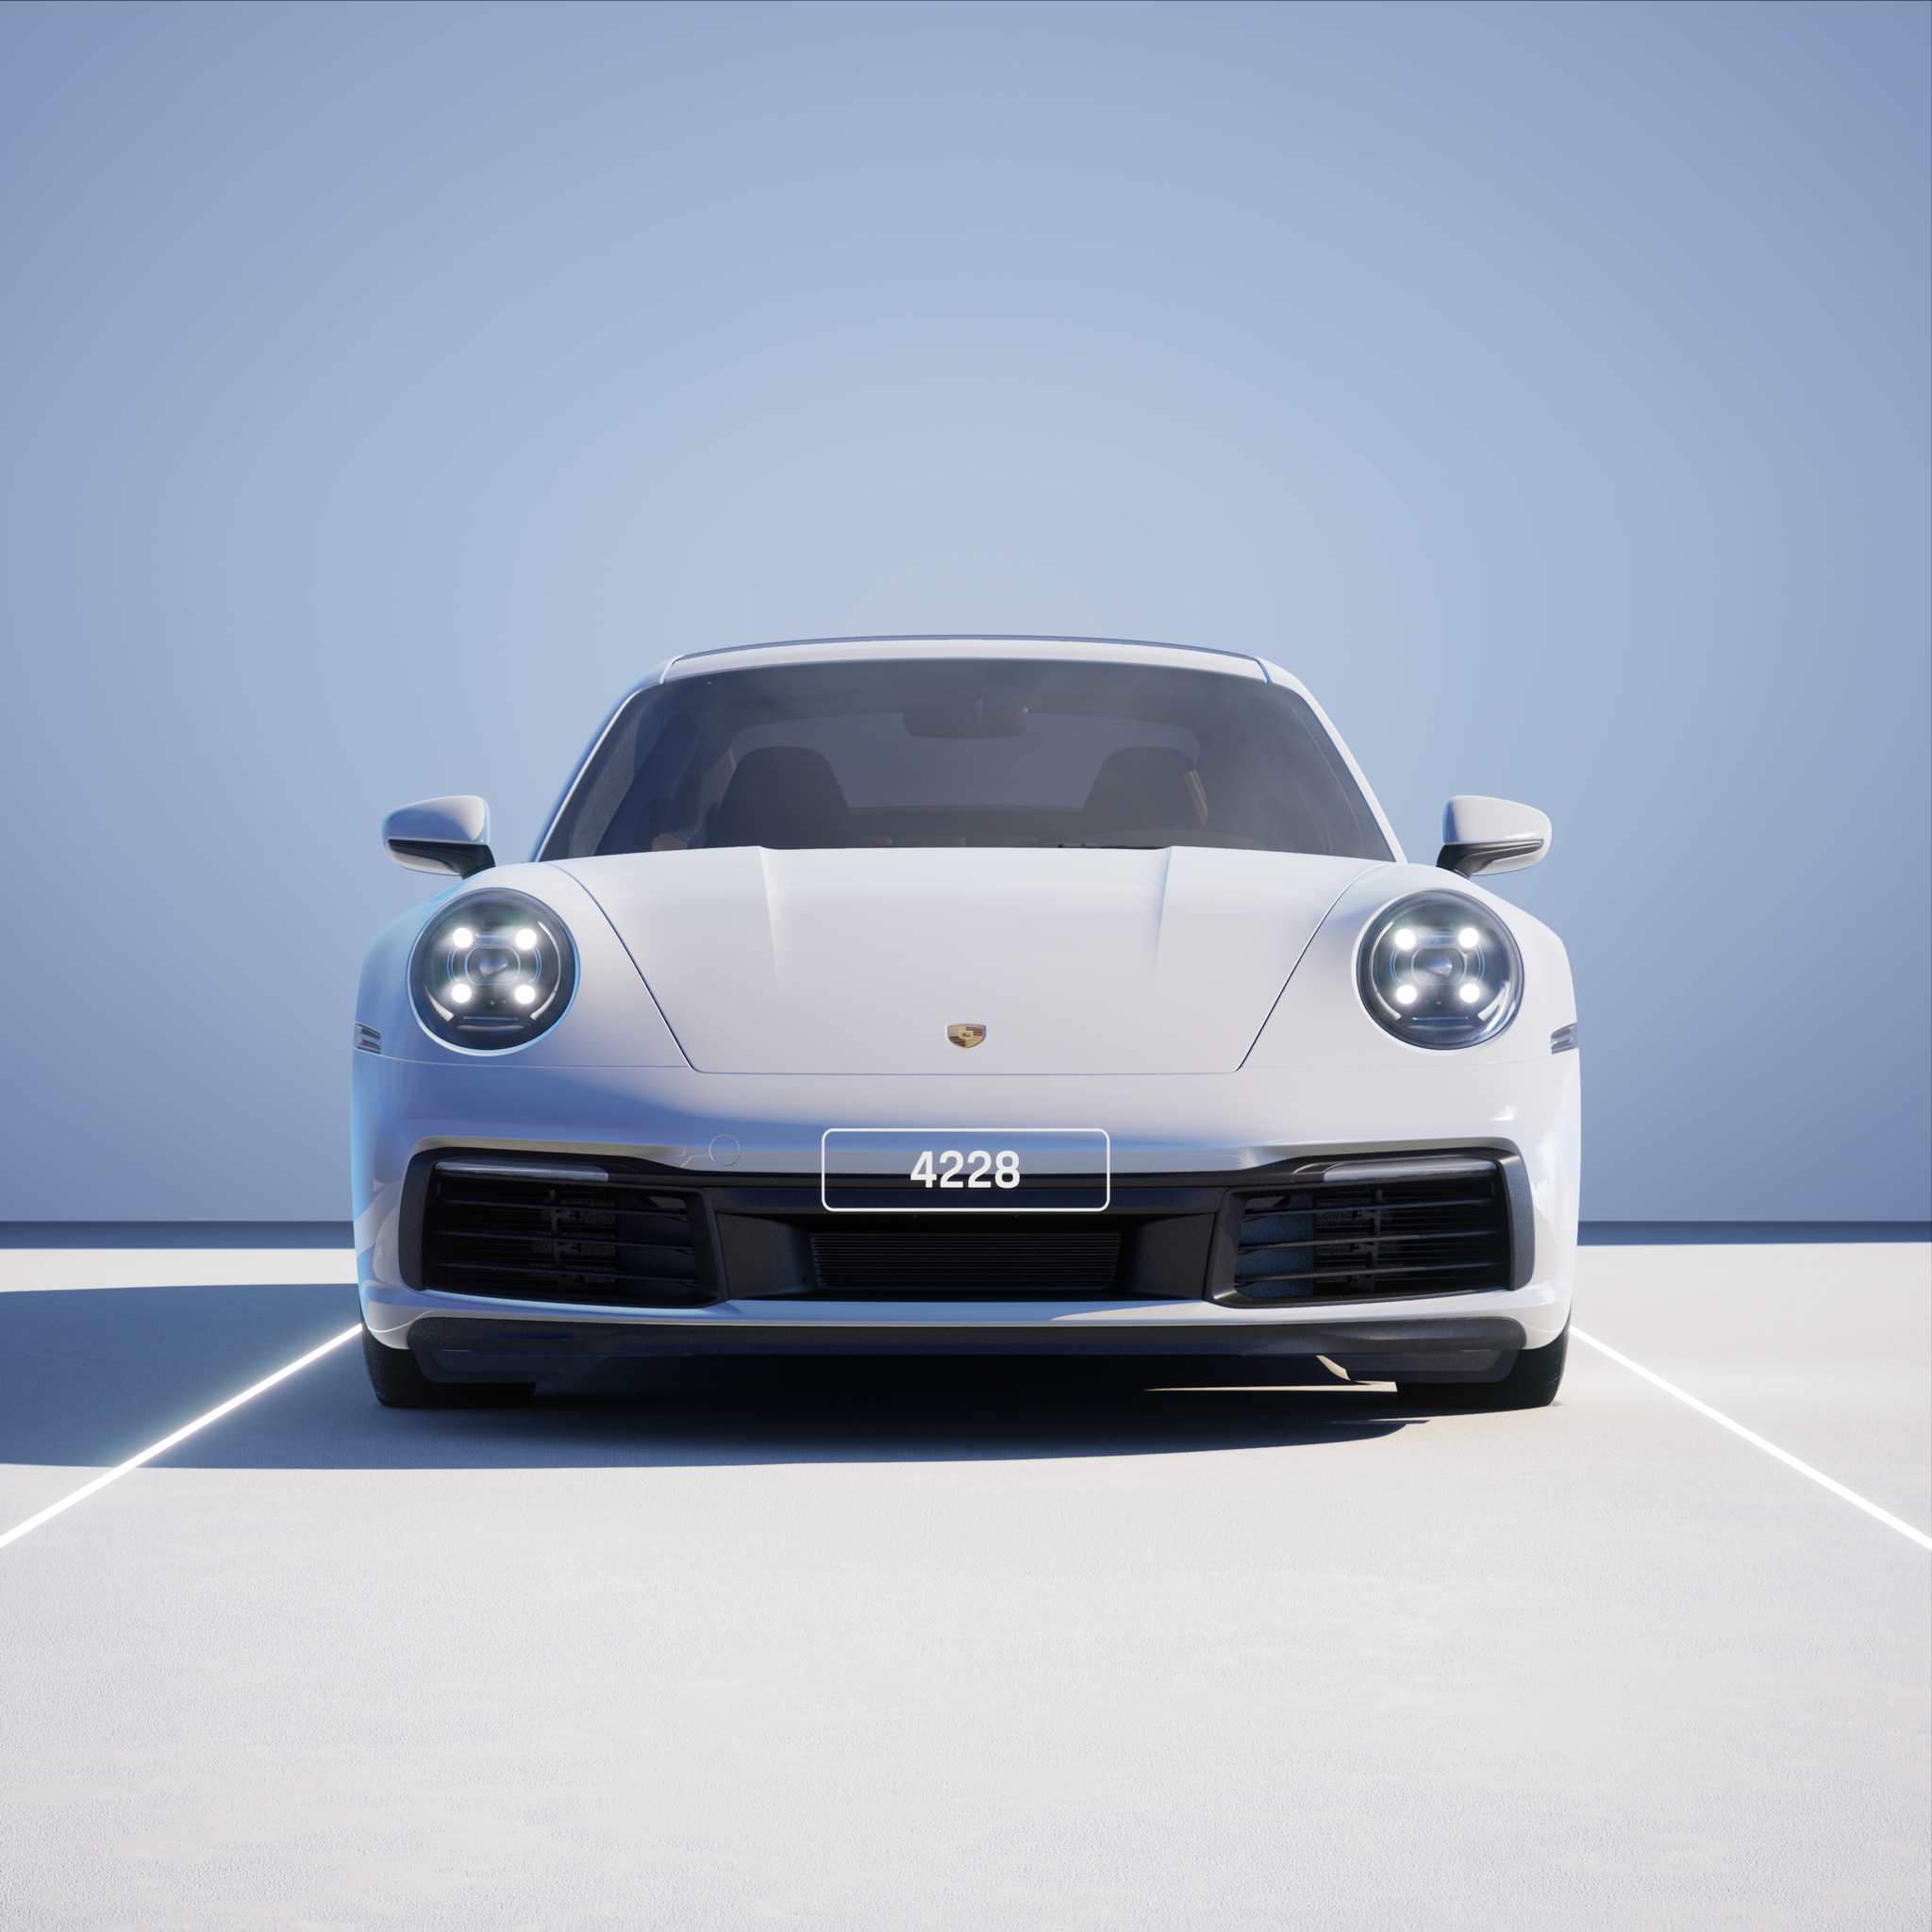 The PORSCHΞ 911 4228 image in phase